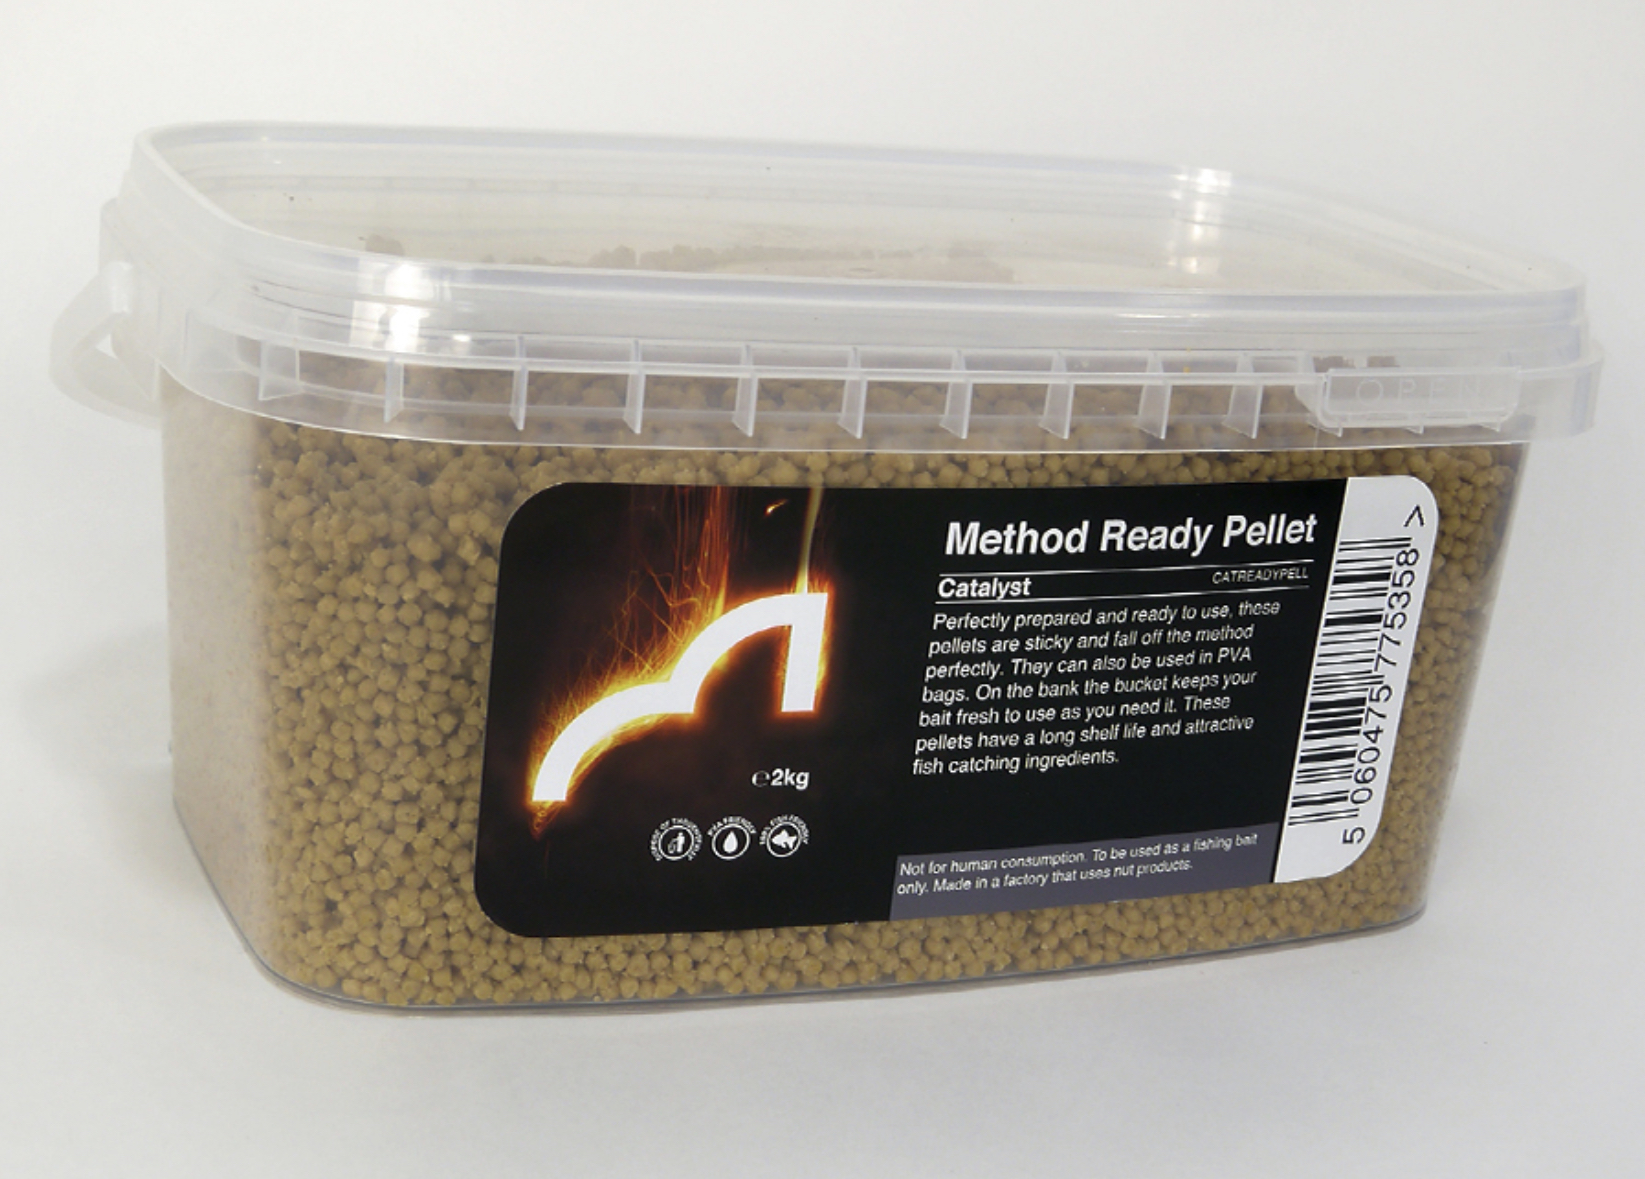 Spotted Fin Method Ready Pellets Catalyst